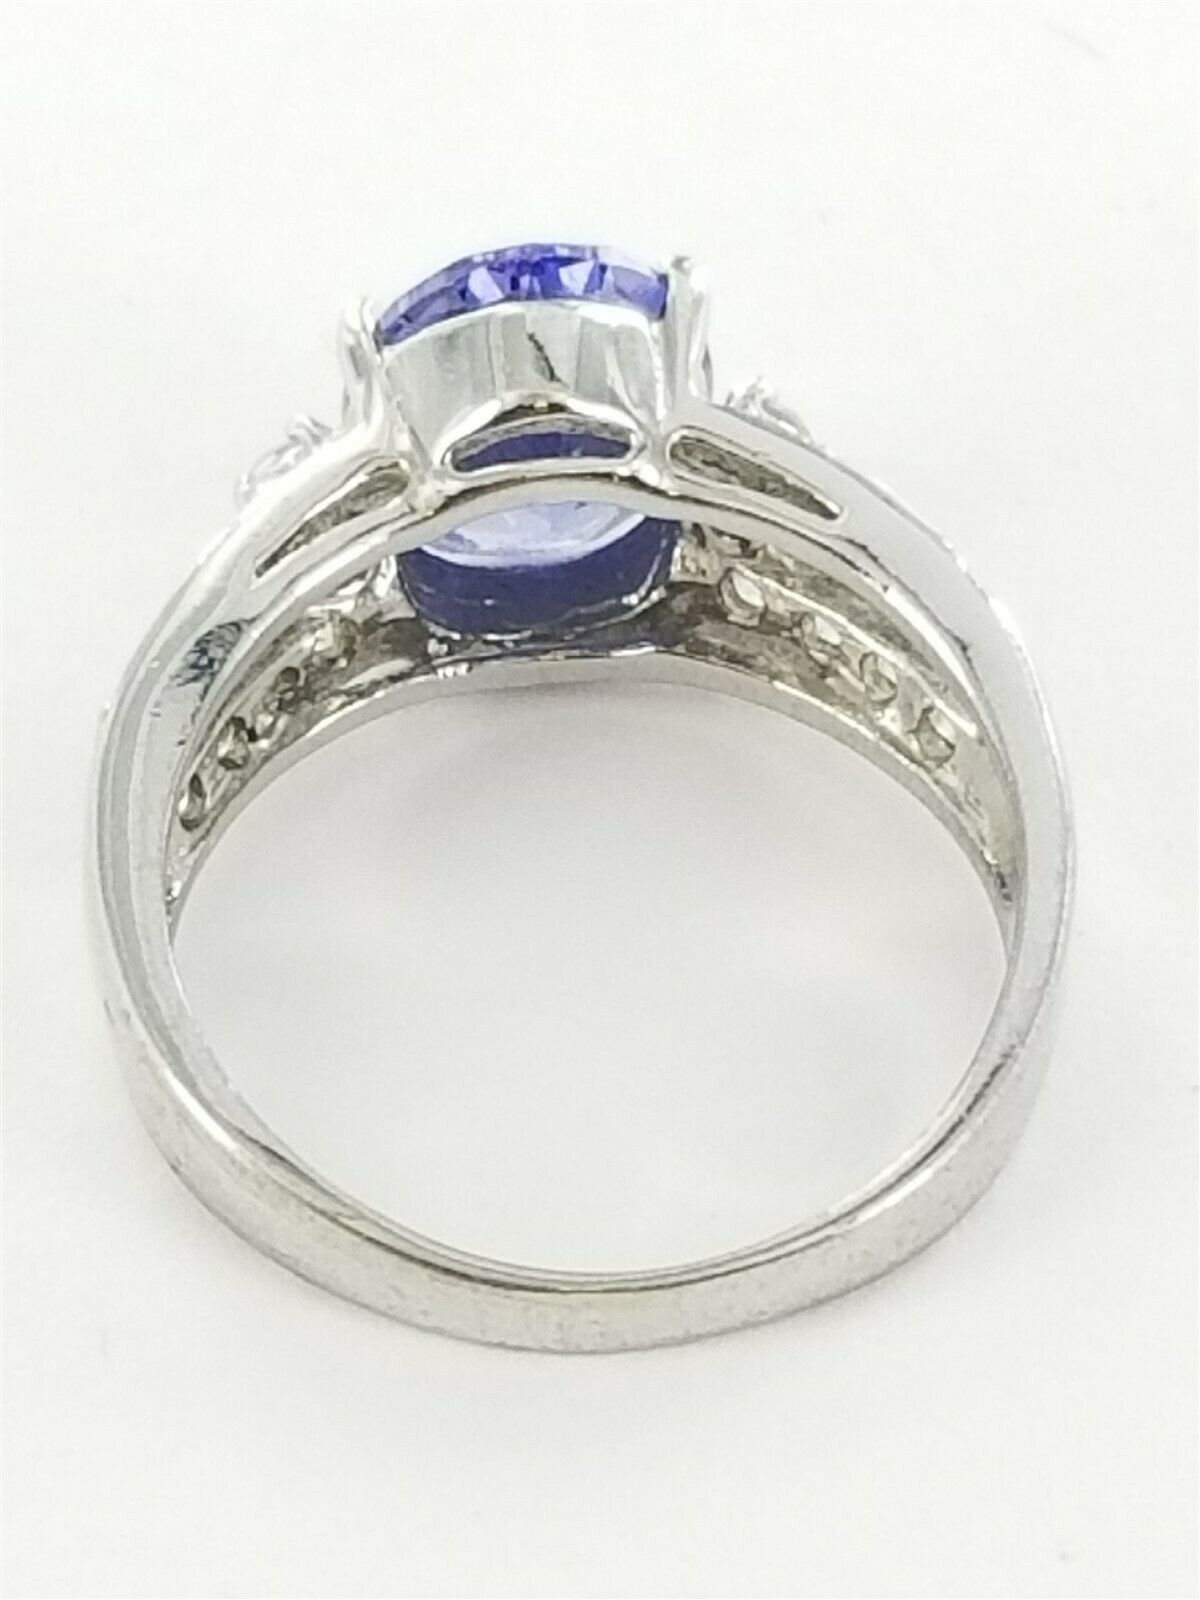 Women's Sterling Silver 925 Ring with Blue & White Stones #82558